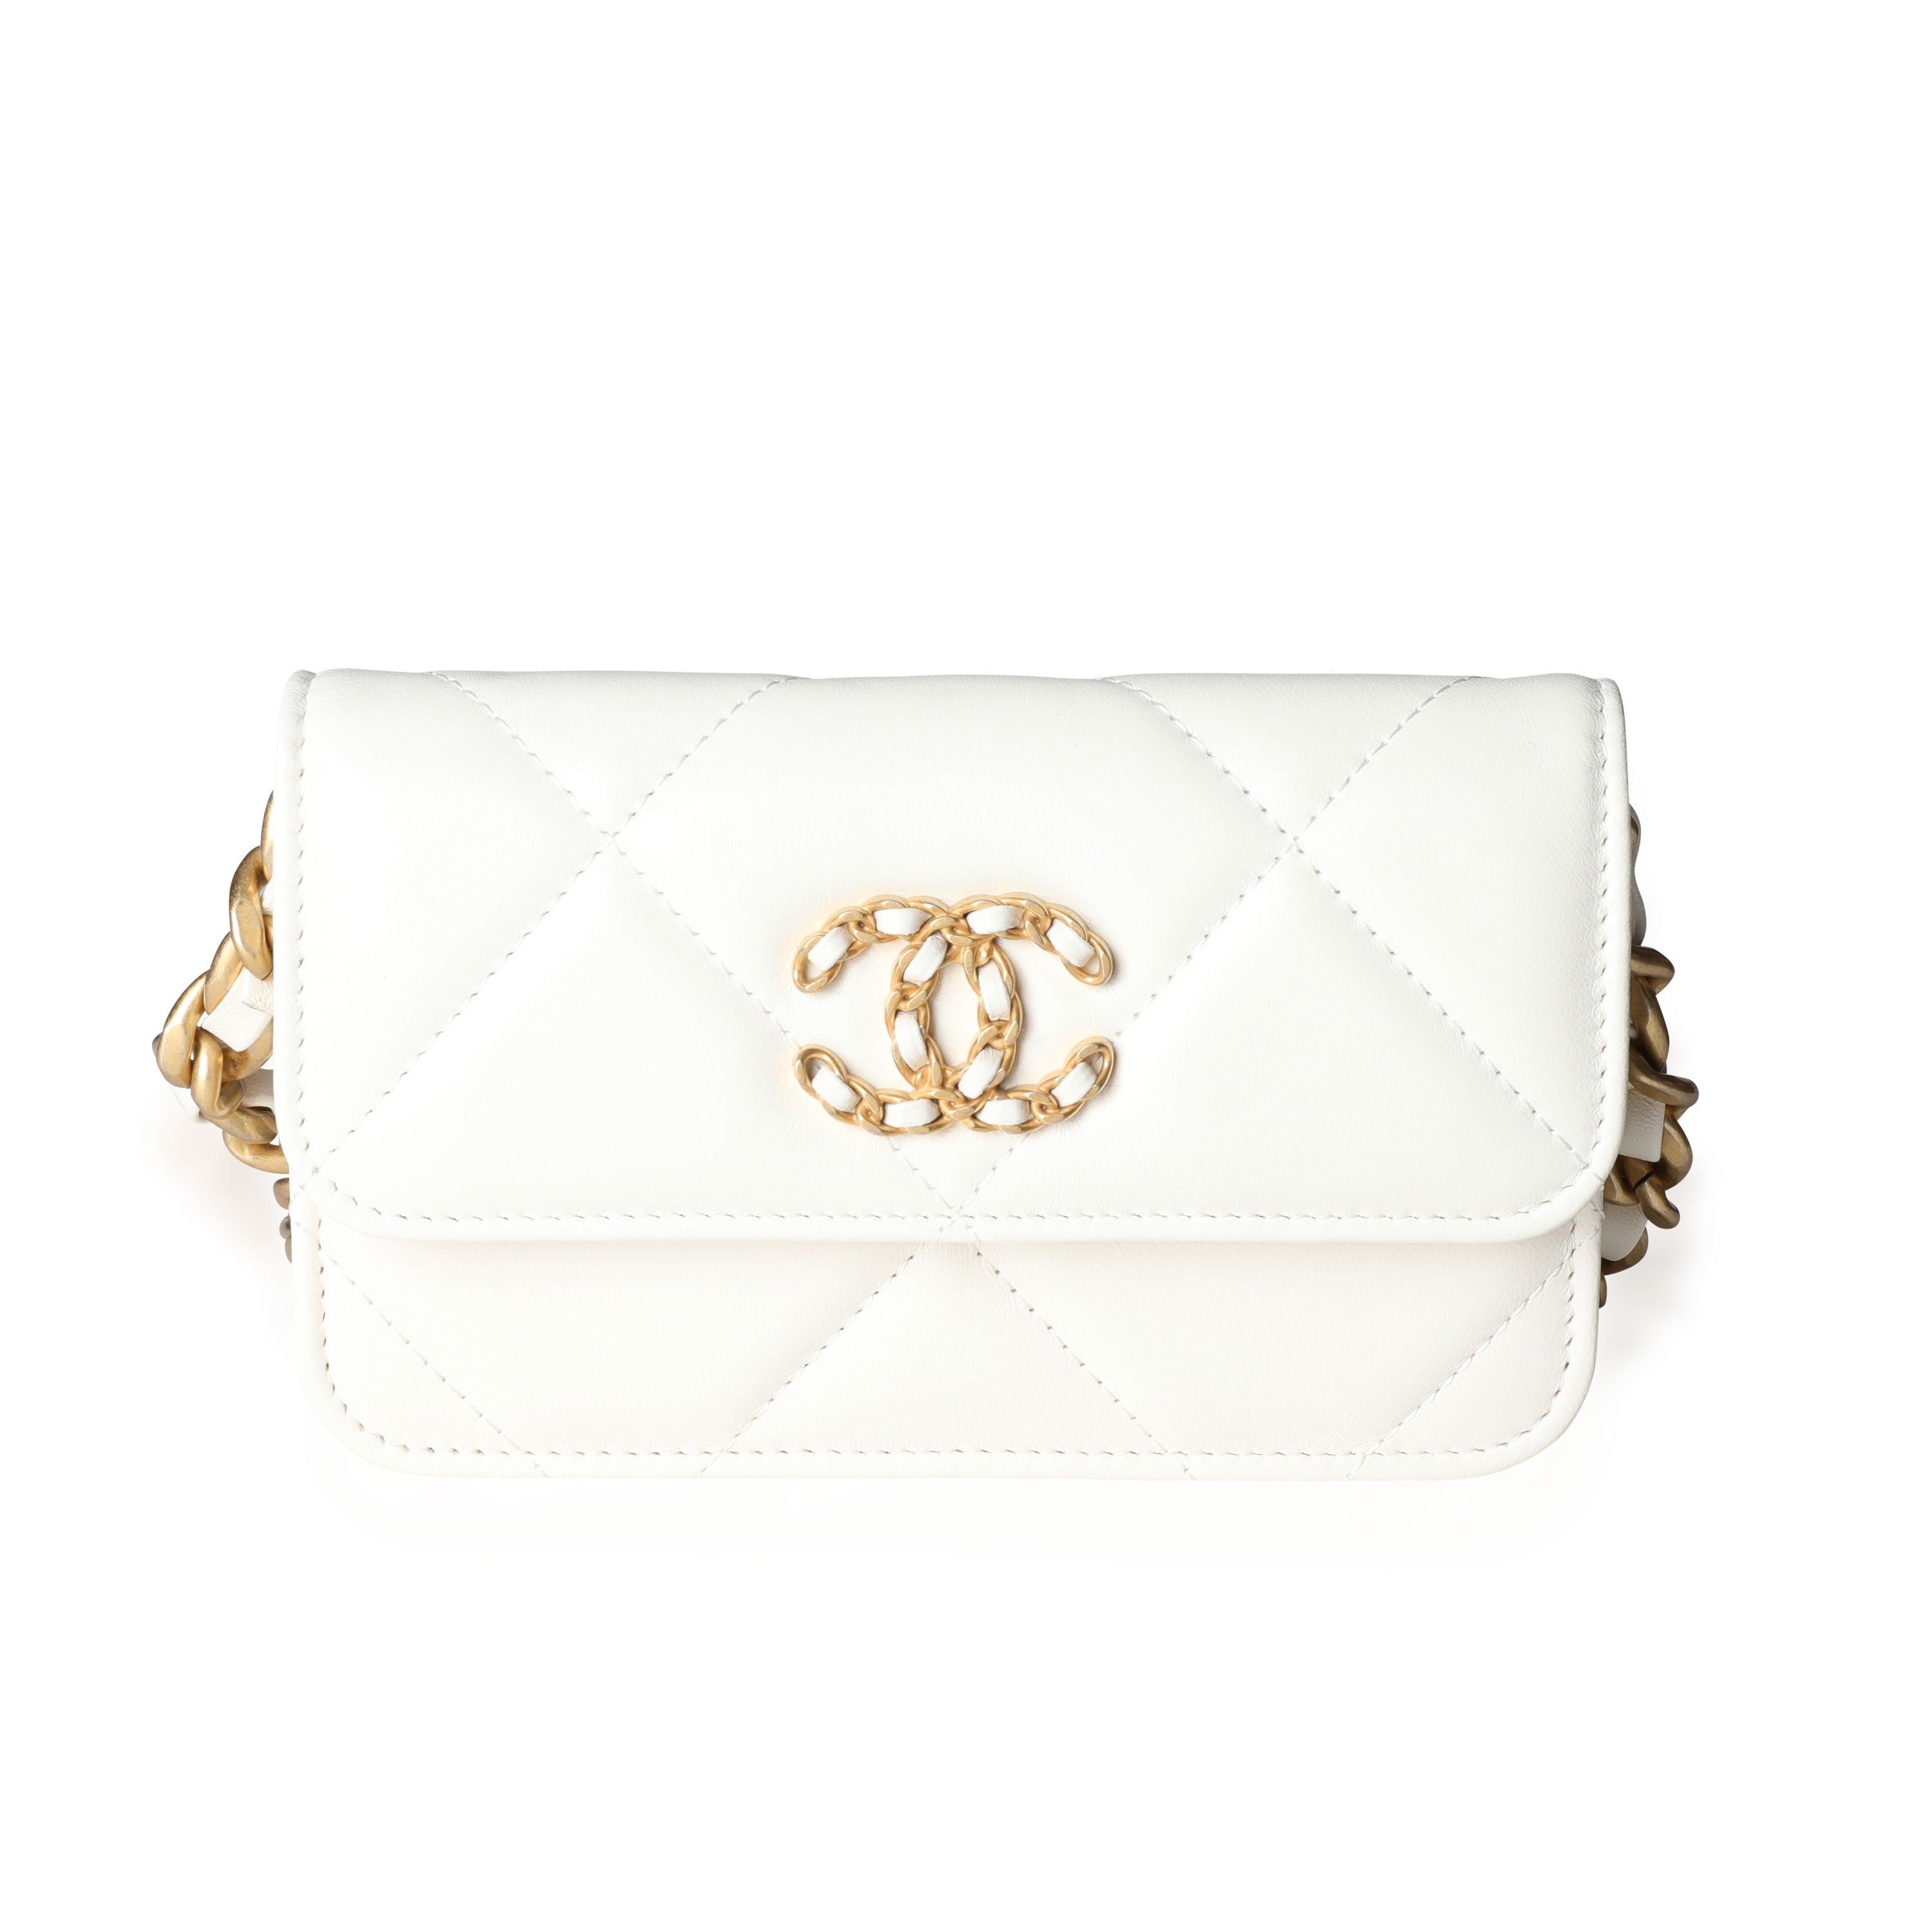 Chanel White Quilted Lambskin Chanel 19 Mini Flap Bag